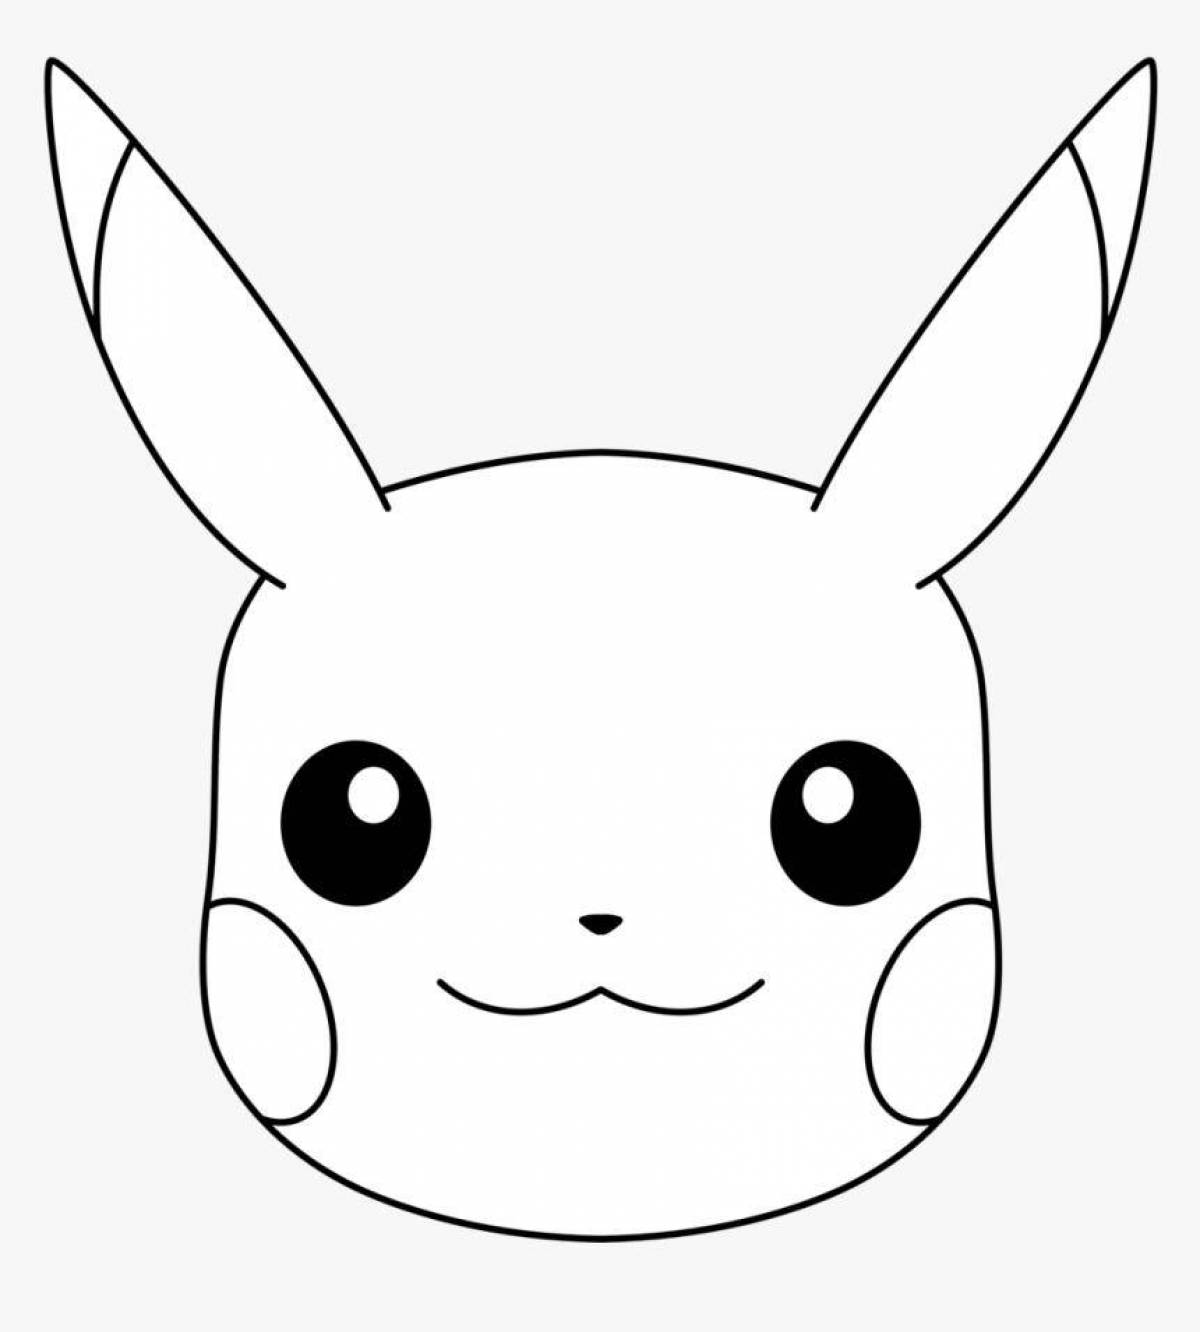 Sparkling Pikachu Coloring Page